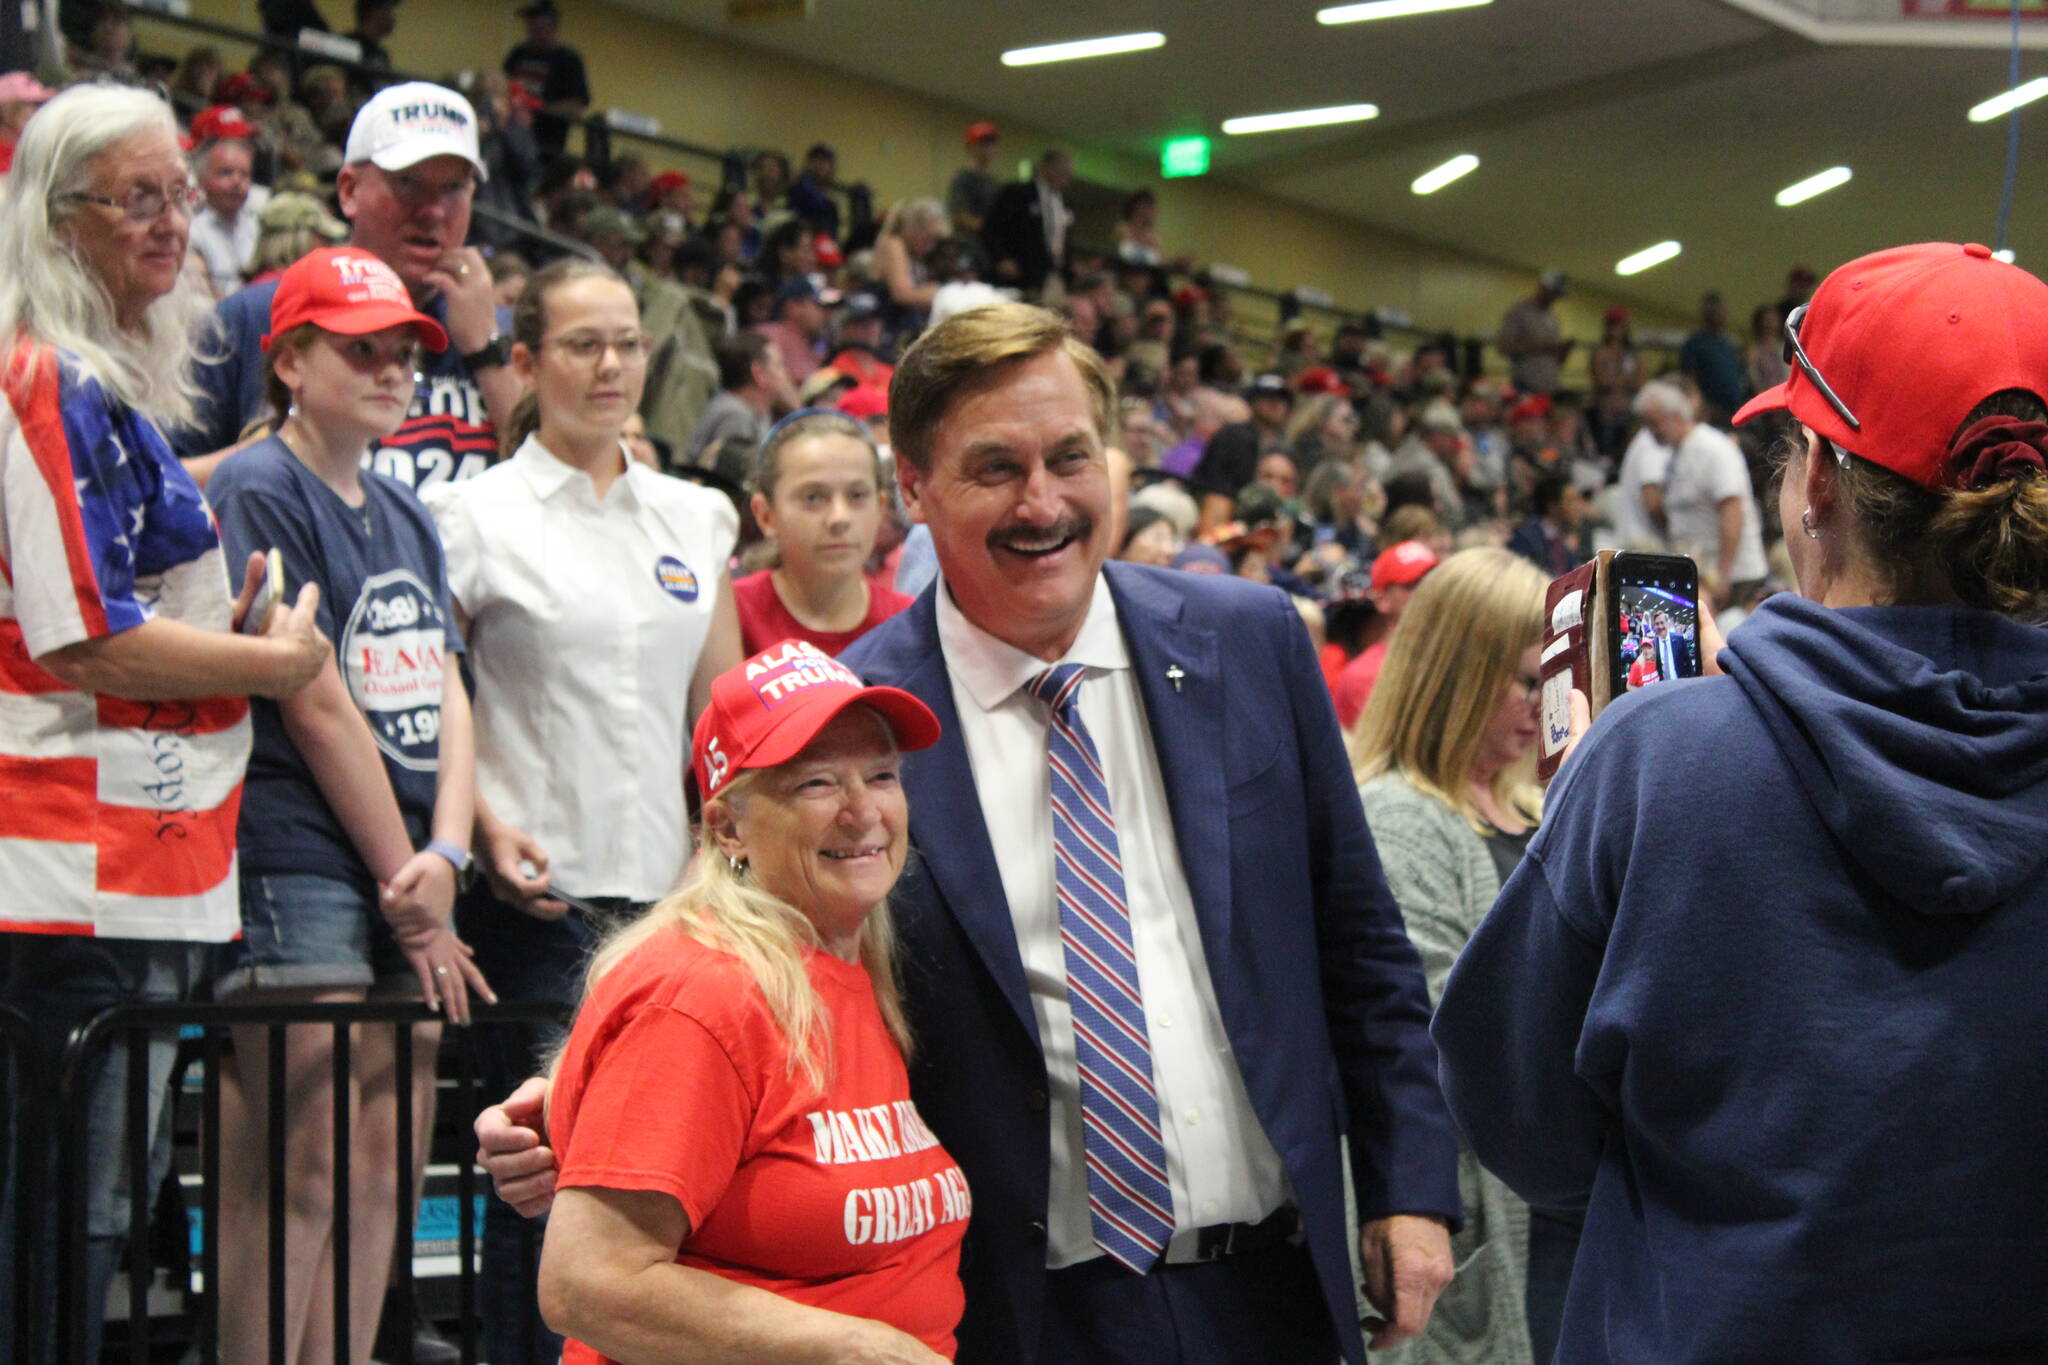 My Pillow CEO and political activist Mike Lindell poses with a Trump supporter Save America rally at the Alaska Airlines Center in Anchorage Alaska, on Saturday, July 9, 2022, in Anchorage, Alaska. (Photo by Ashlyn O’Hara/Peninsula Clarion)